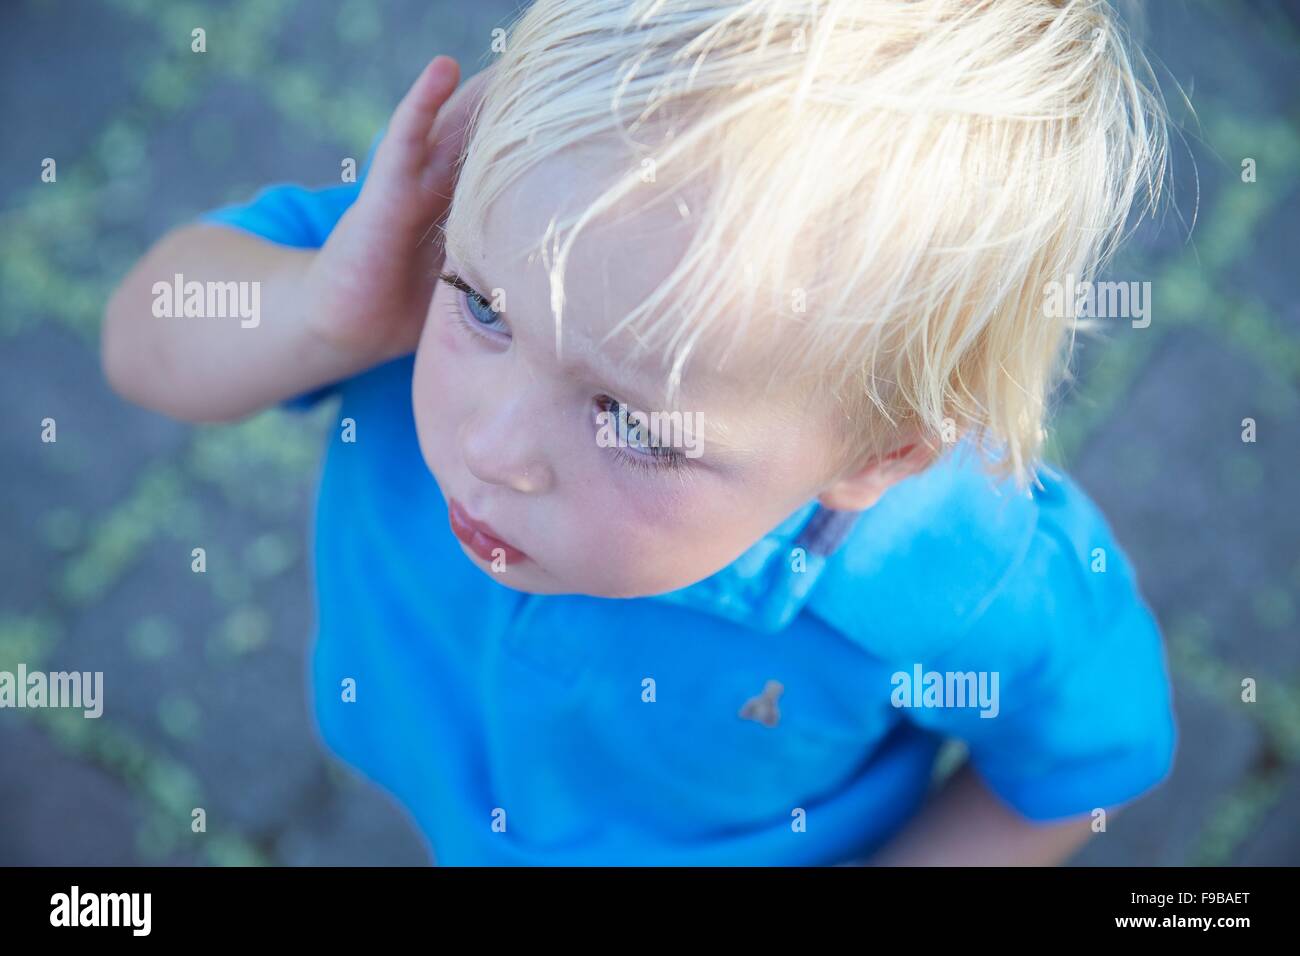 MODEL RELEASED. Boy with blonde hair, high angle view. Stock Photo